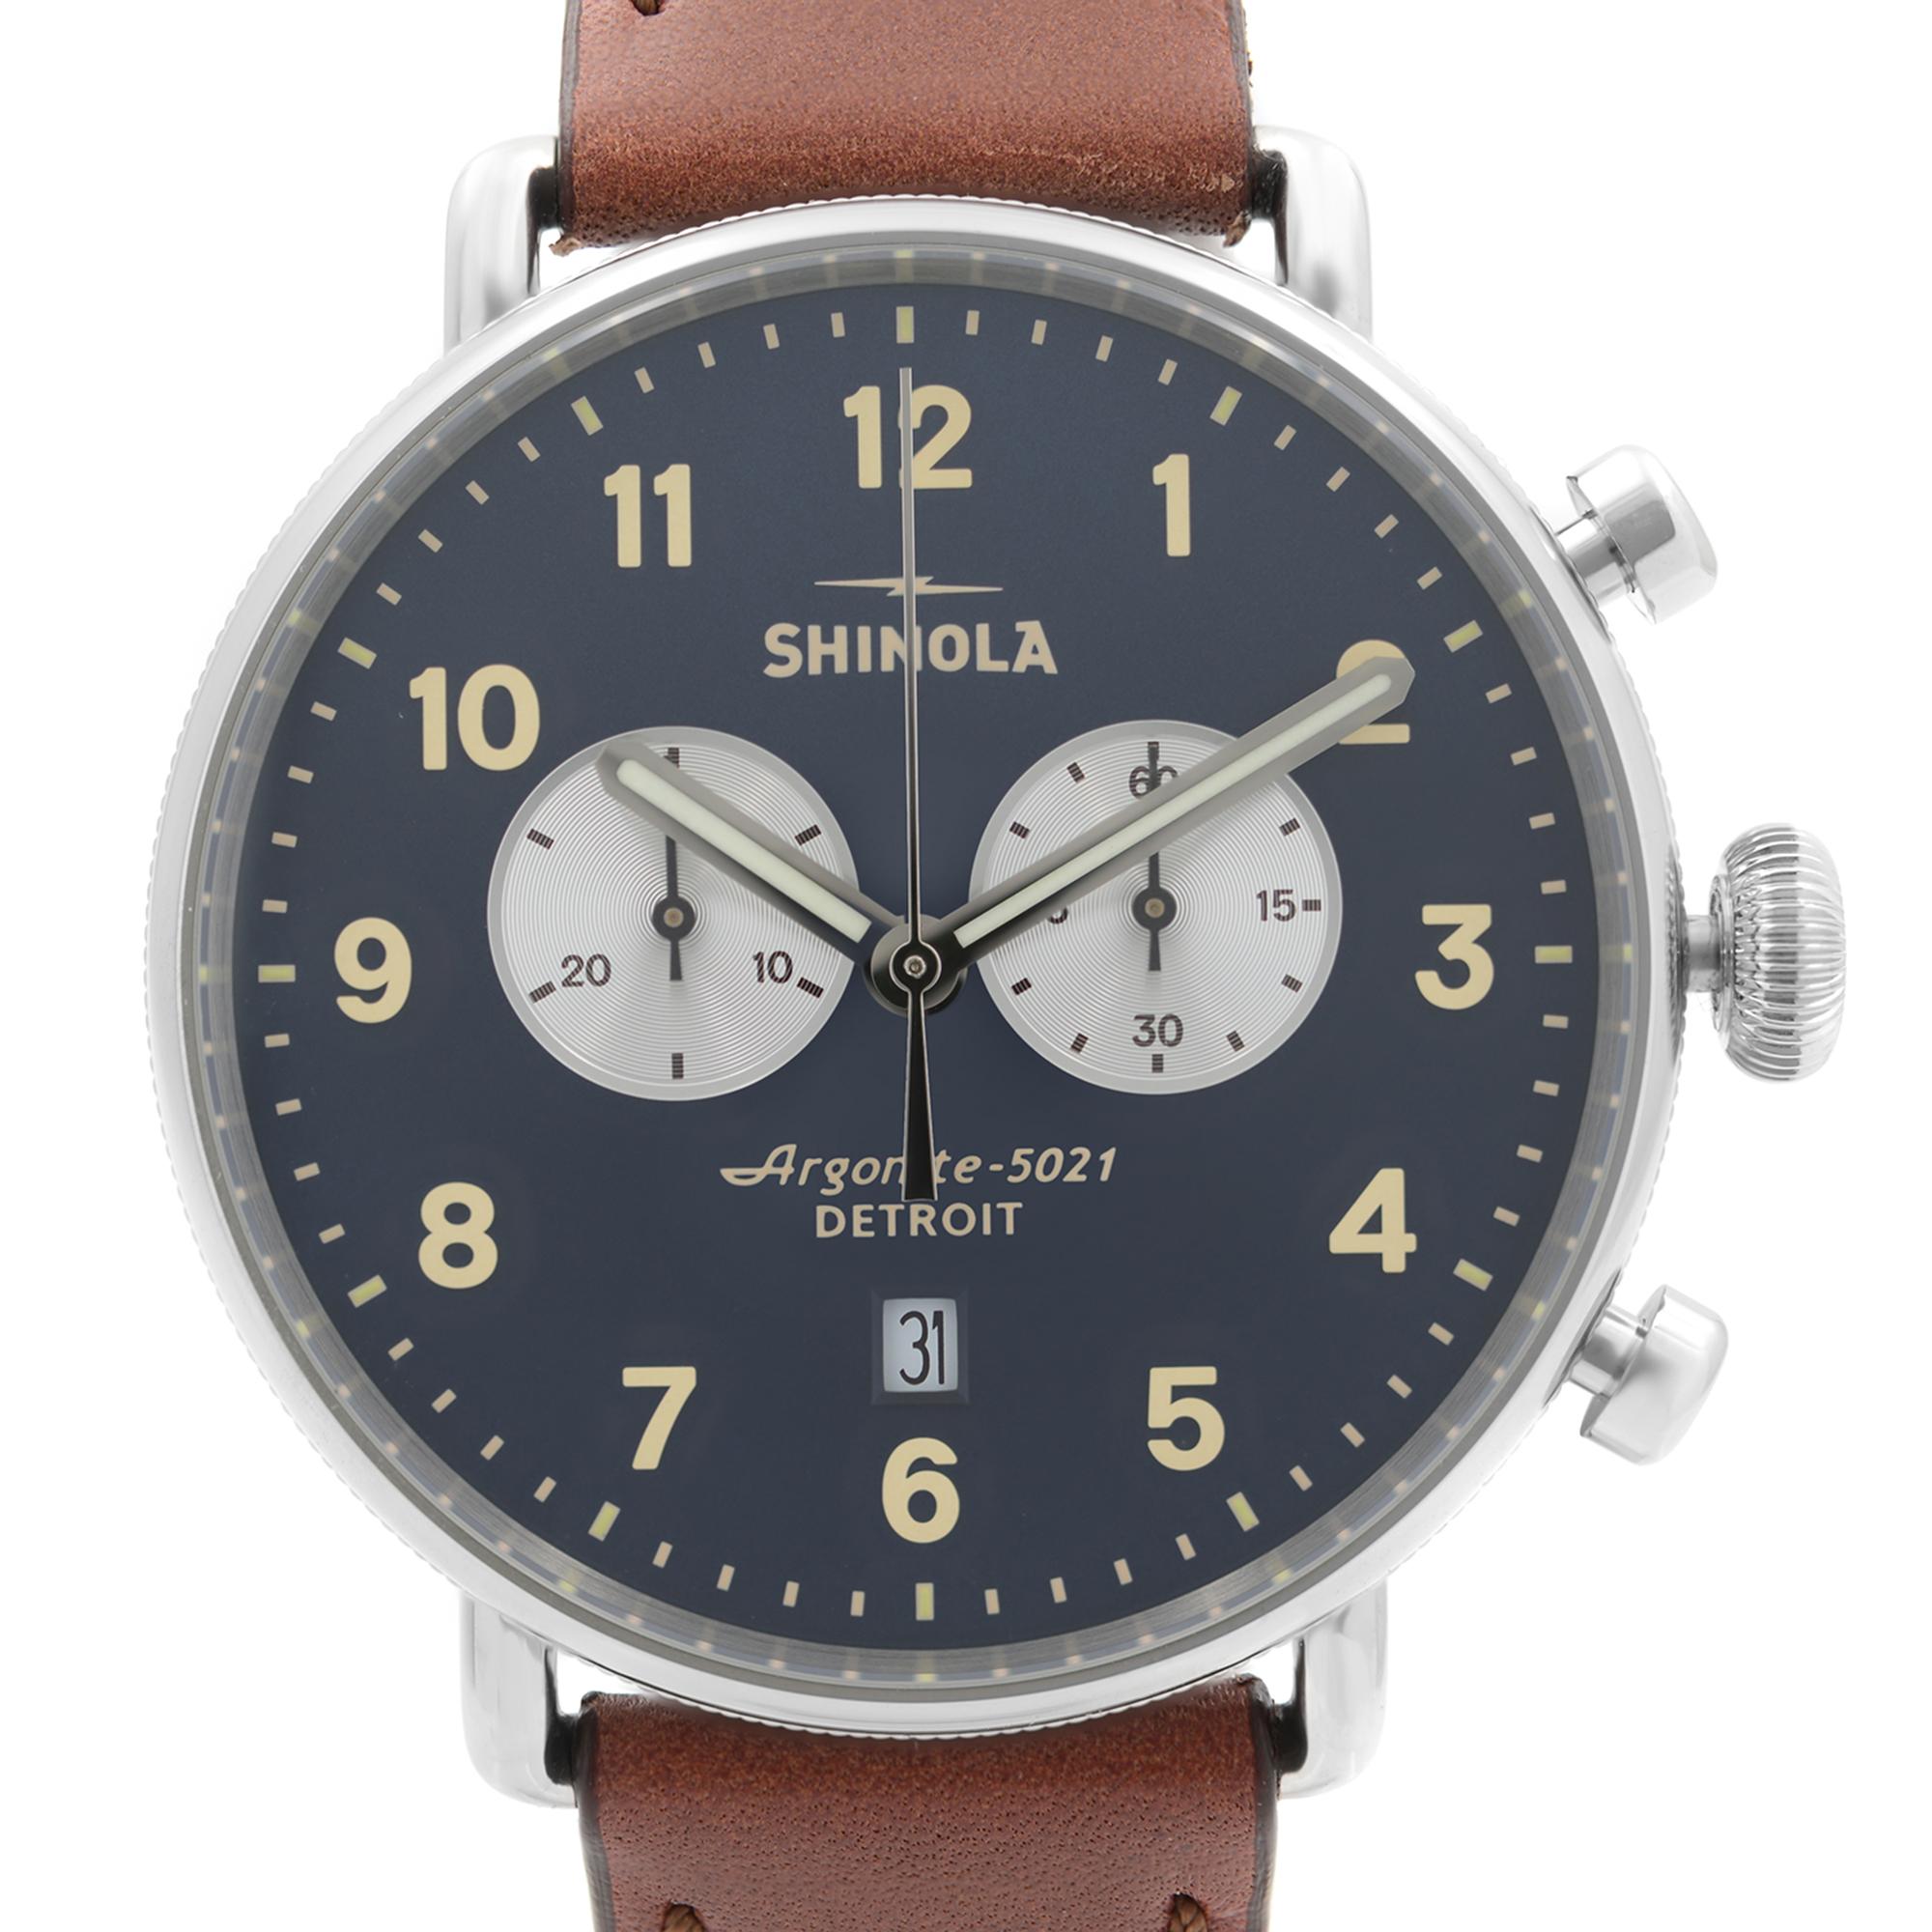 Unworn Shinola The Canfield Quartz Men's Watch S0120001940. Original Box and Papers are Included. Covered by 3-year Chronostore Warranty.
Details:
MSRP 850
Brand Shinola
Department Men
Model Number S0120001940
Country/Region of Manufacture United